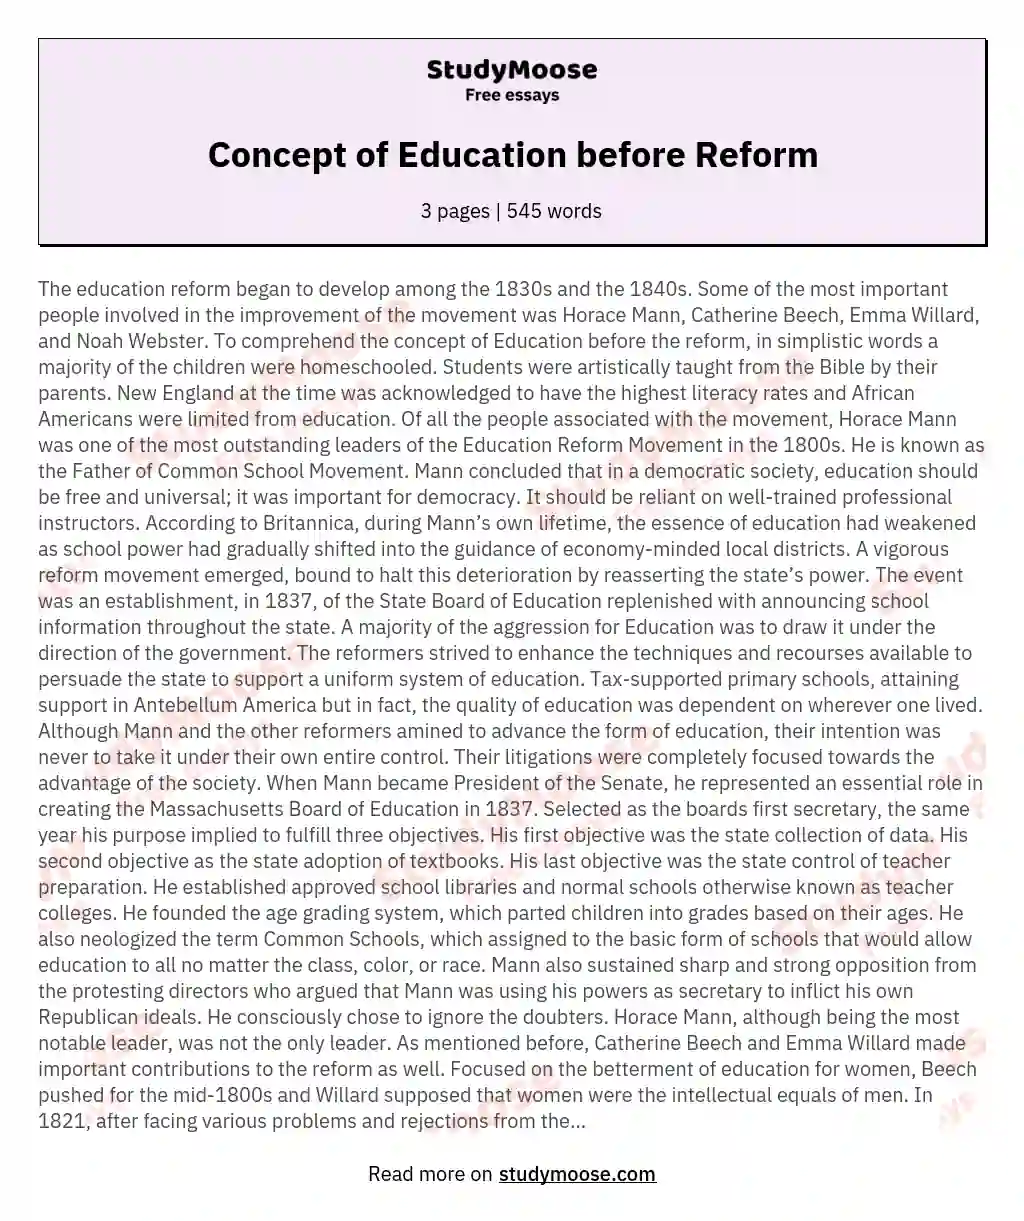 Concept of Education before Reform essay